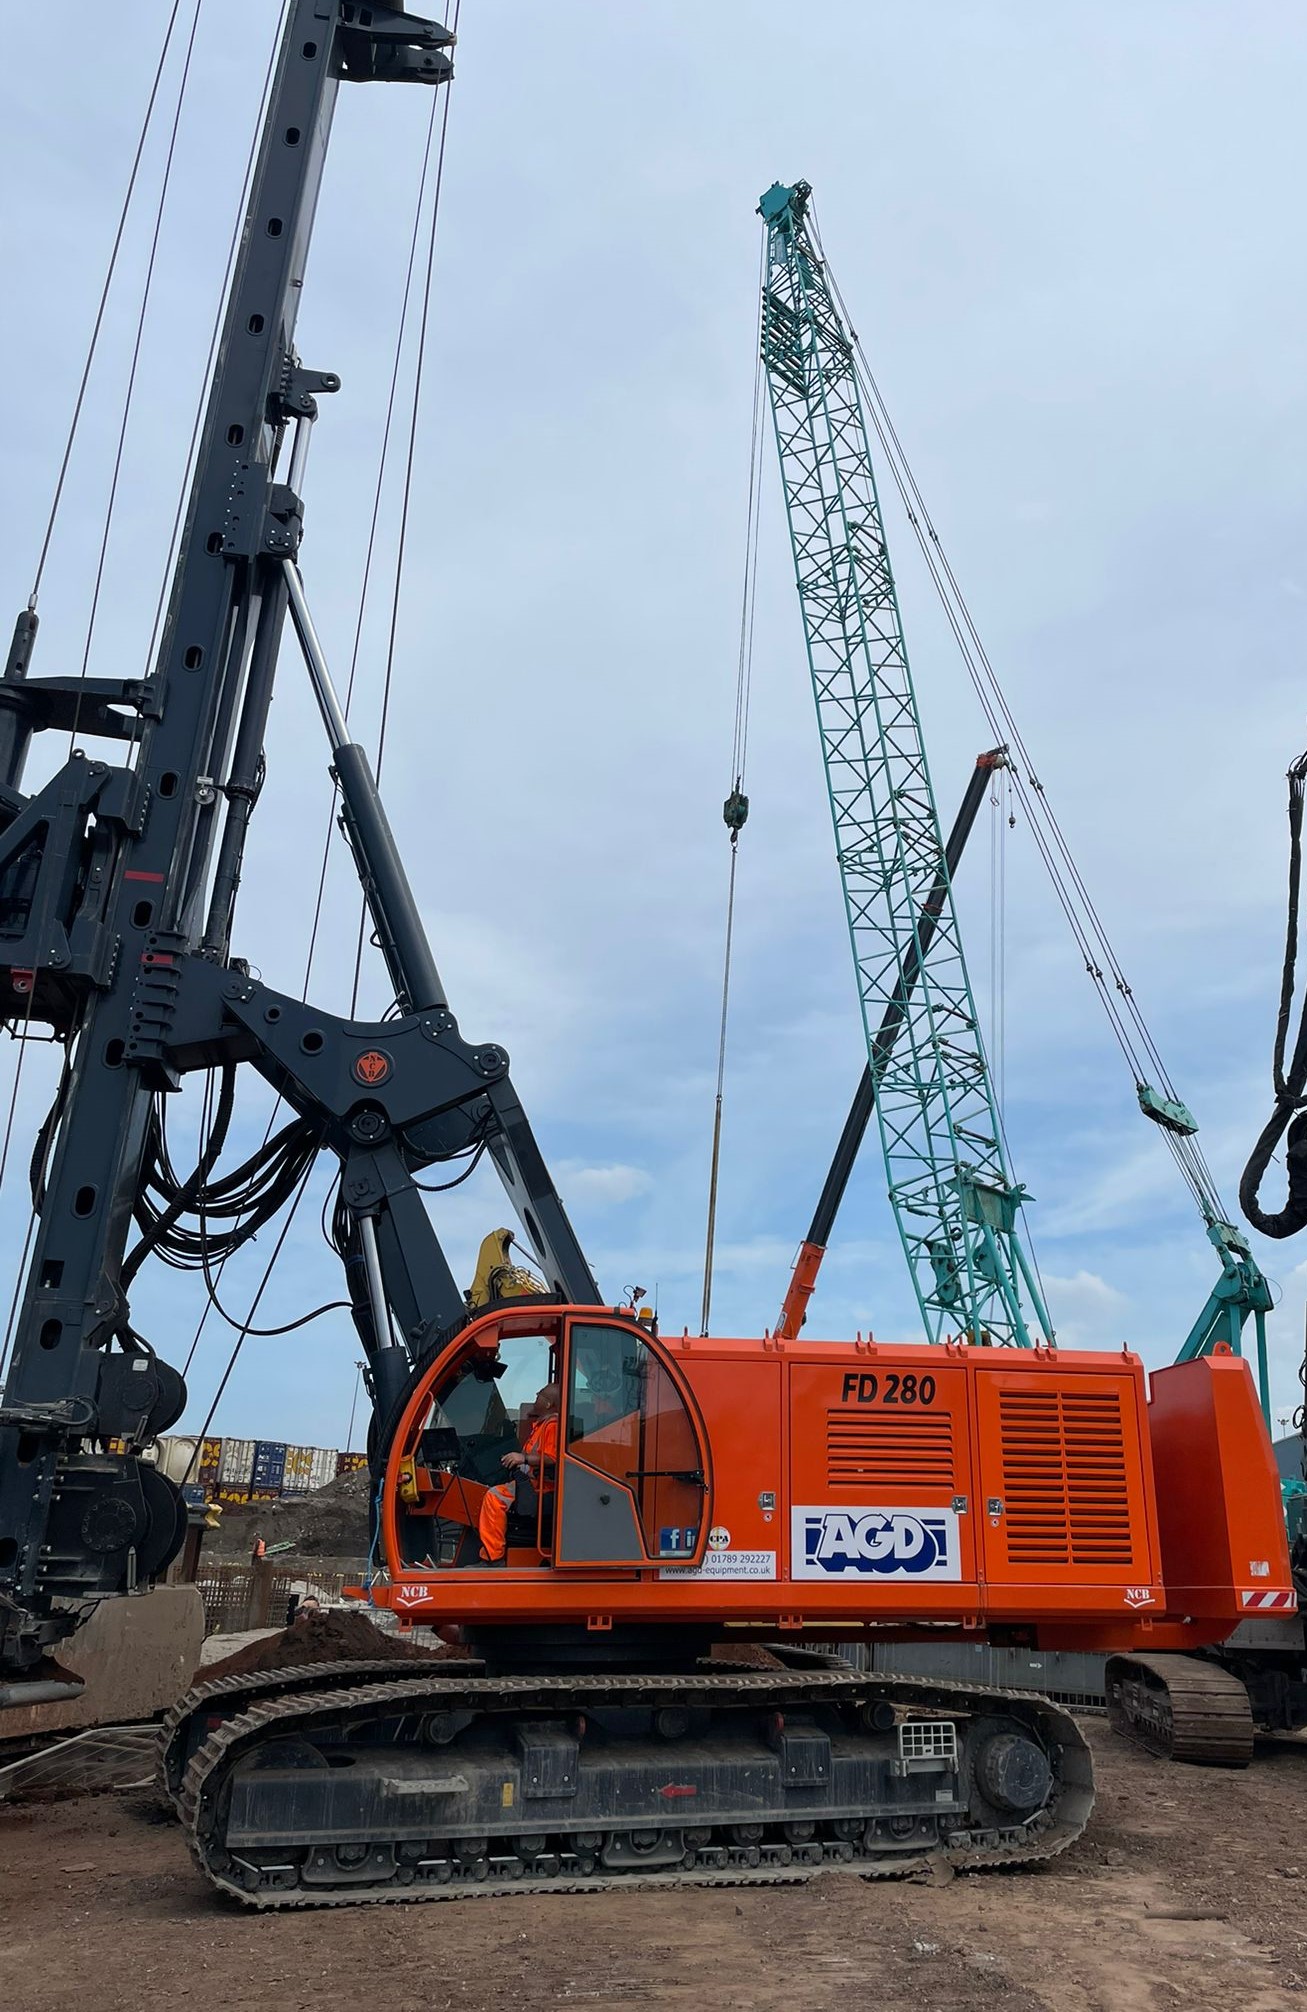 Providers of UK Pioneer In Rotary Piling Rig Hire UK